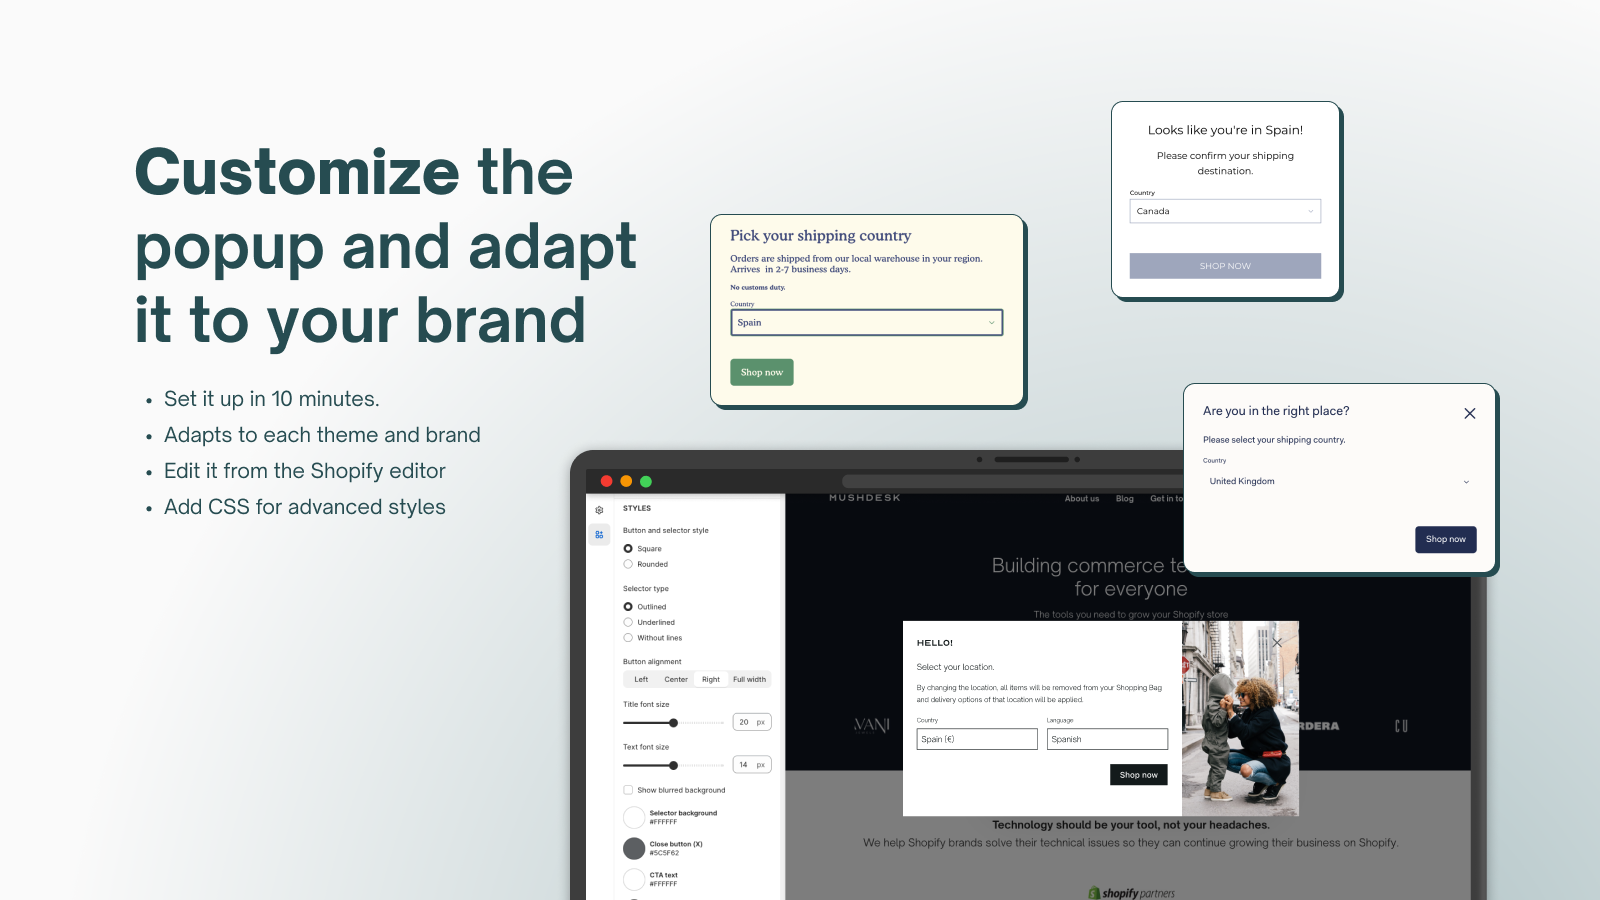 Customize the welcome popup and adapt it to your brand